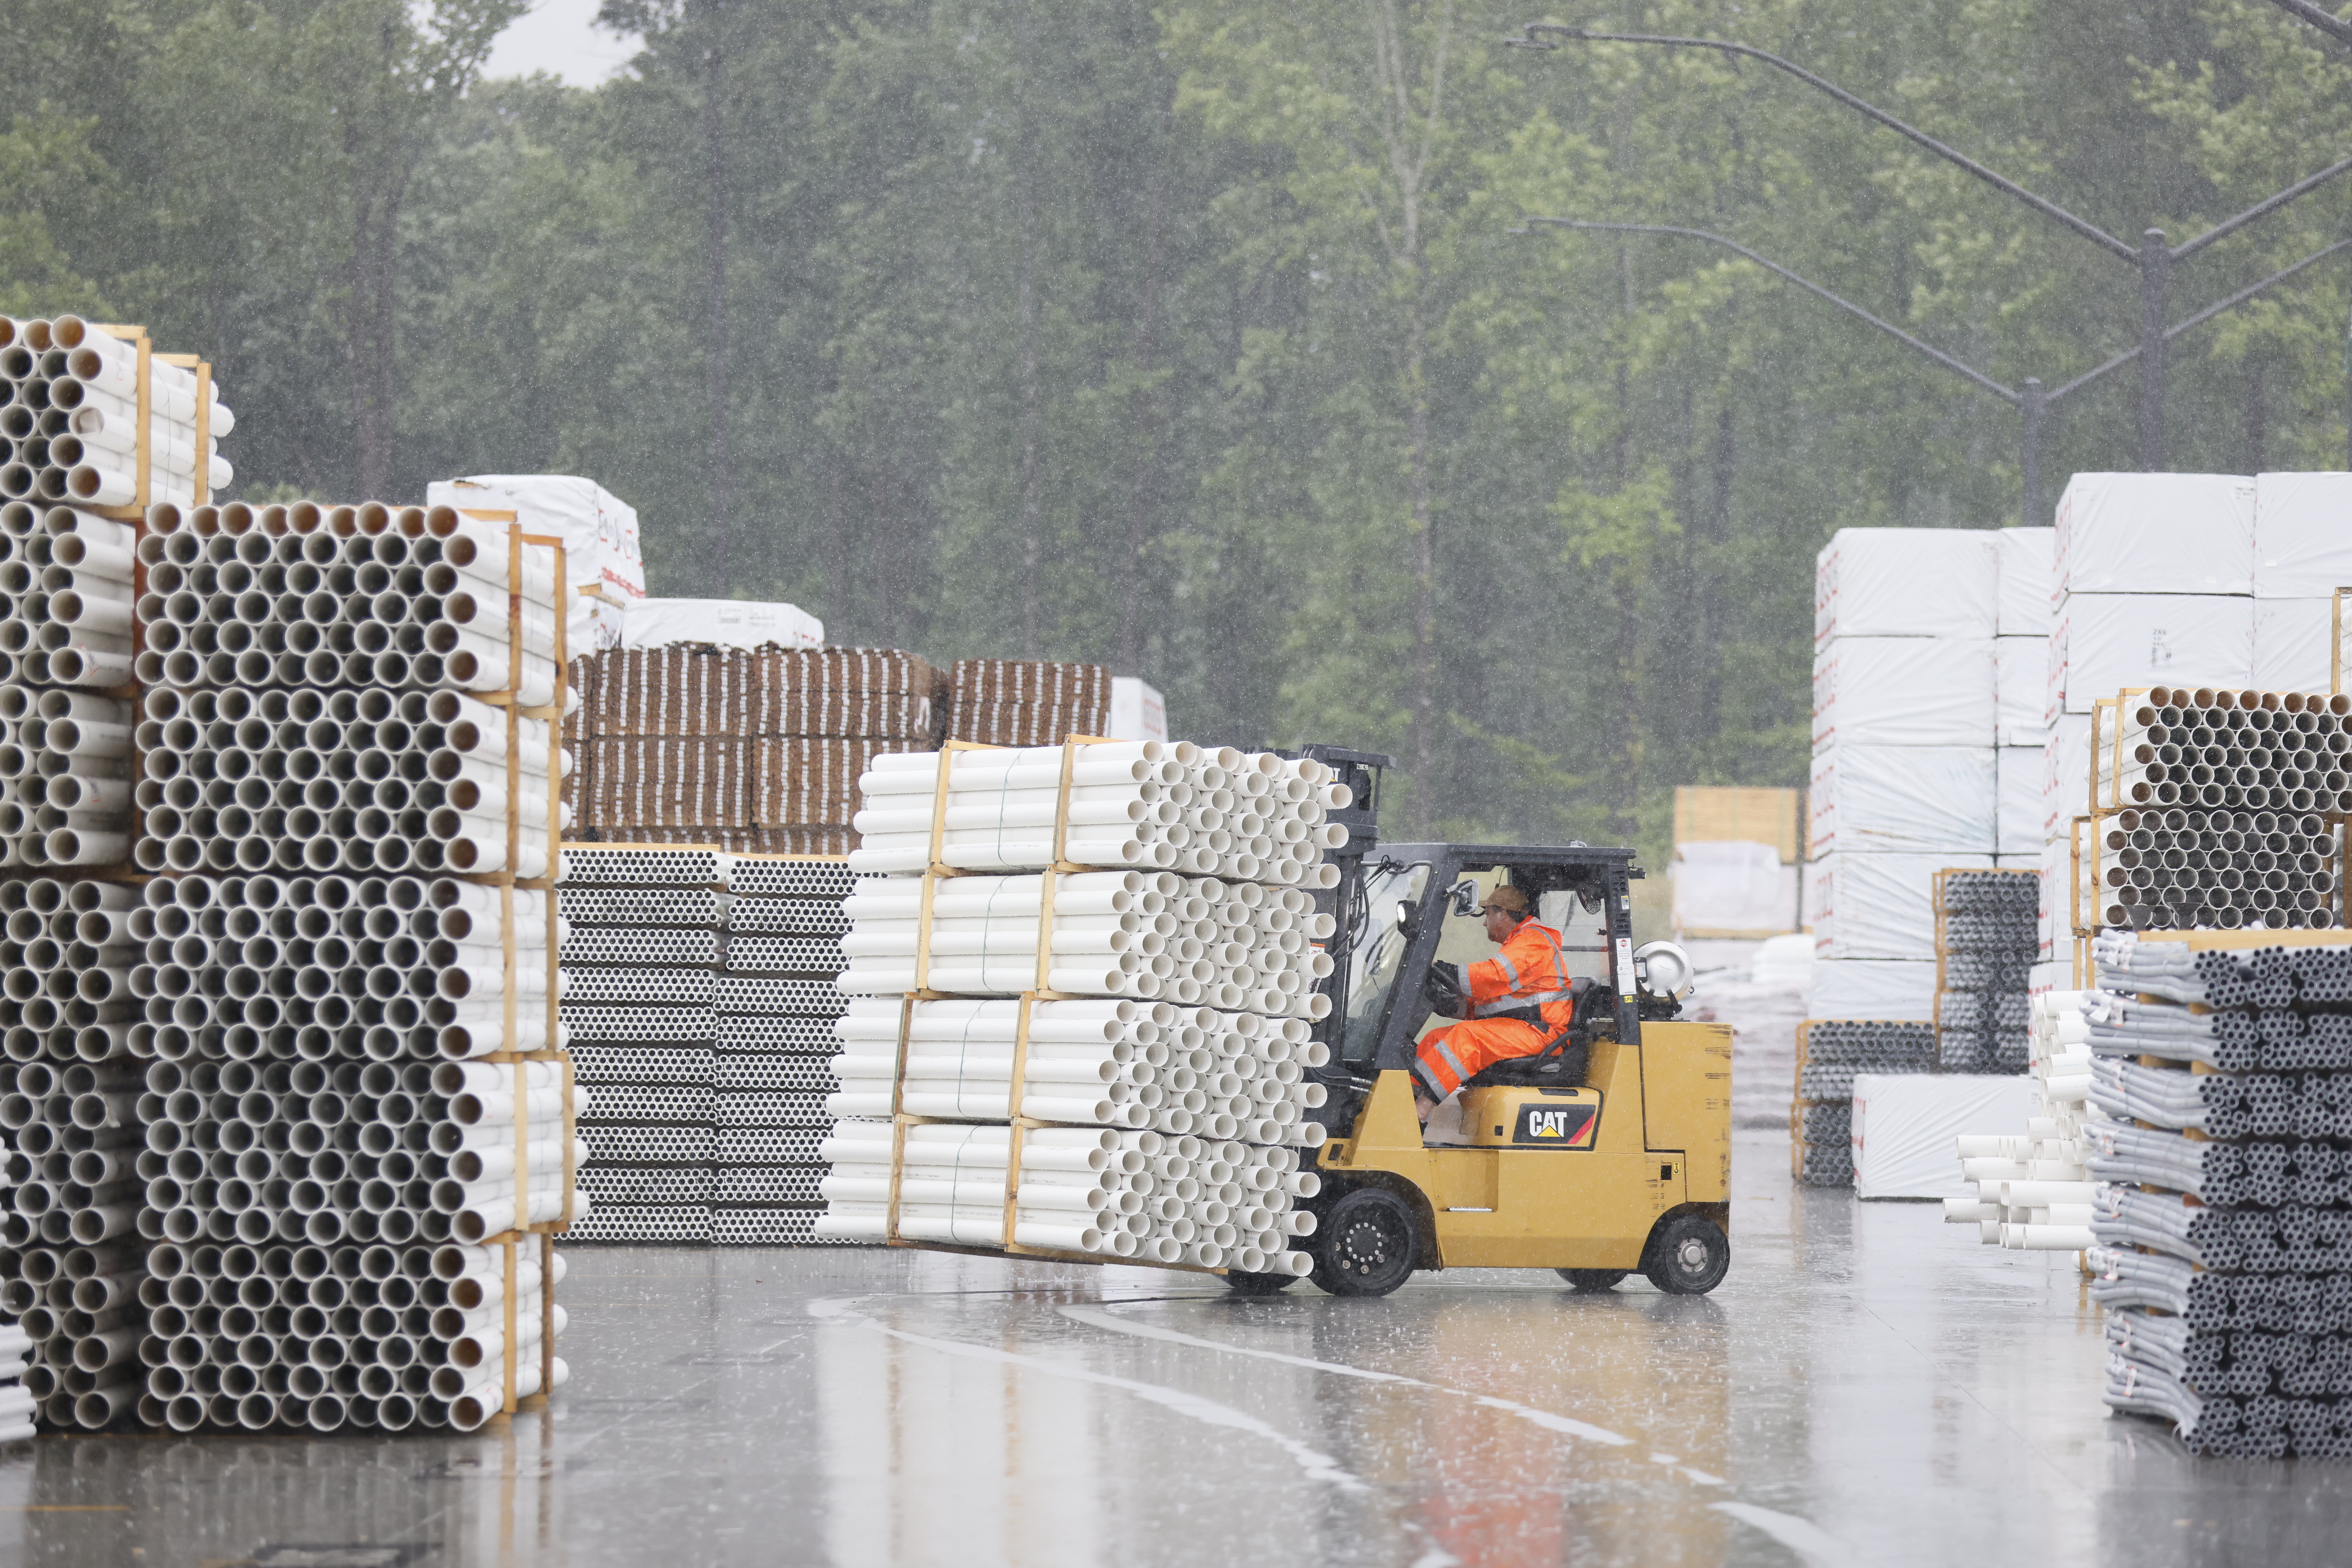 Regardless of the weather, the warehouse does not stop working, with three shifts a day, operations are carried out by more than two hundred workers. Monday, May 23, 2022. Miguel Martinez / miguel.martinezjimenez@ajc.com